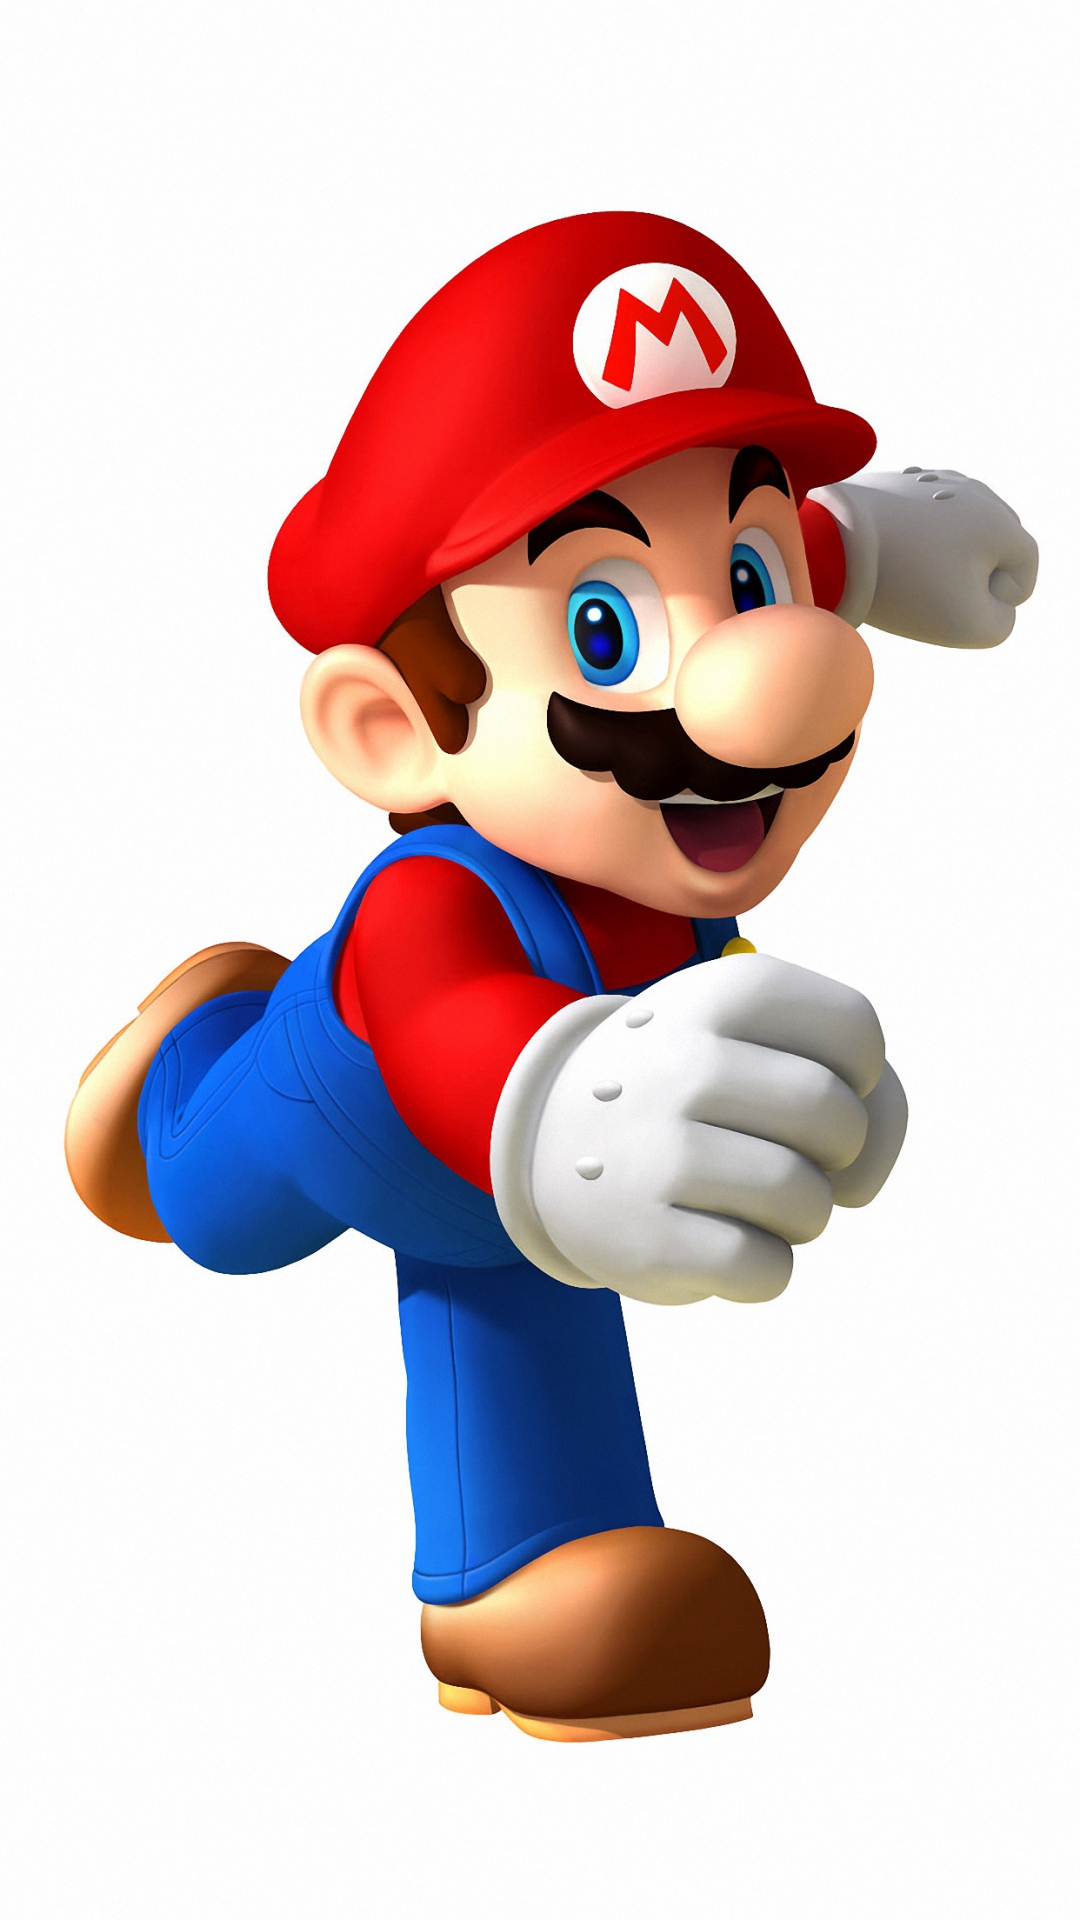 3d Mario Game Iphone 6 Wallpapers Hd - Mario Party Ds Mario - 1080x1920 ...